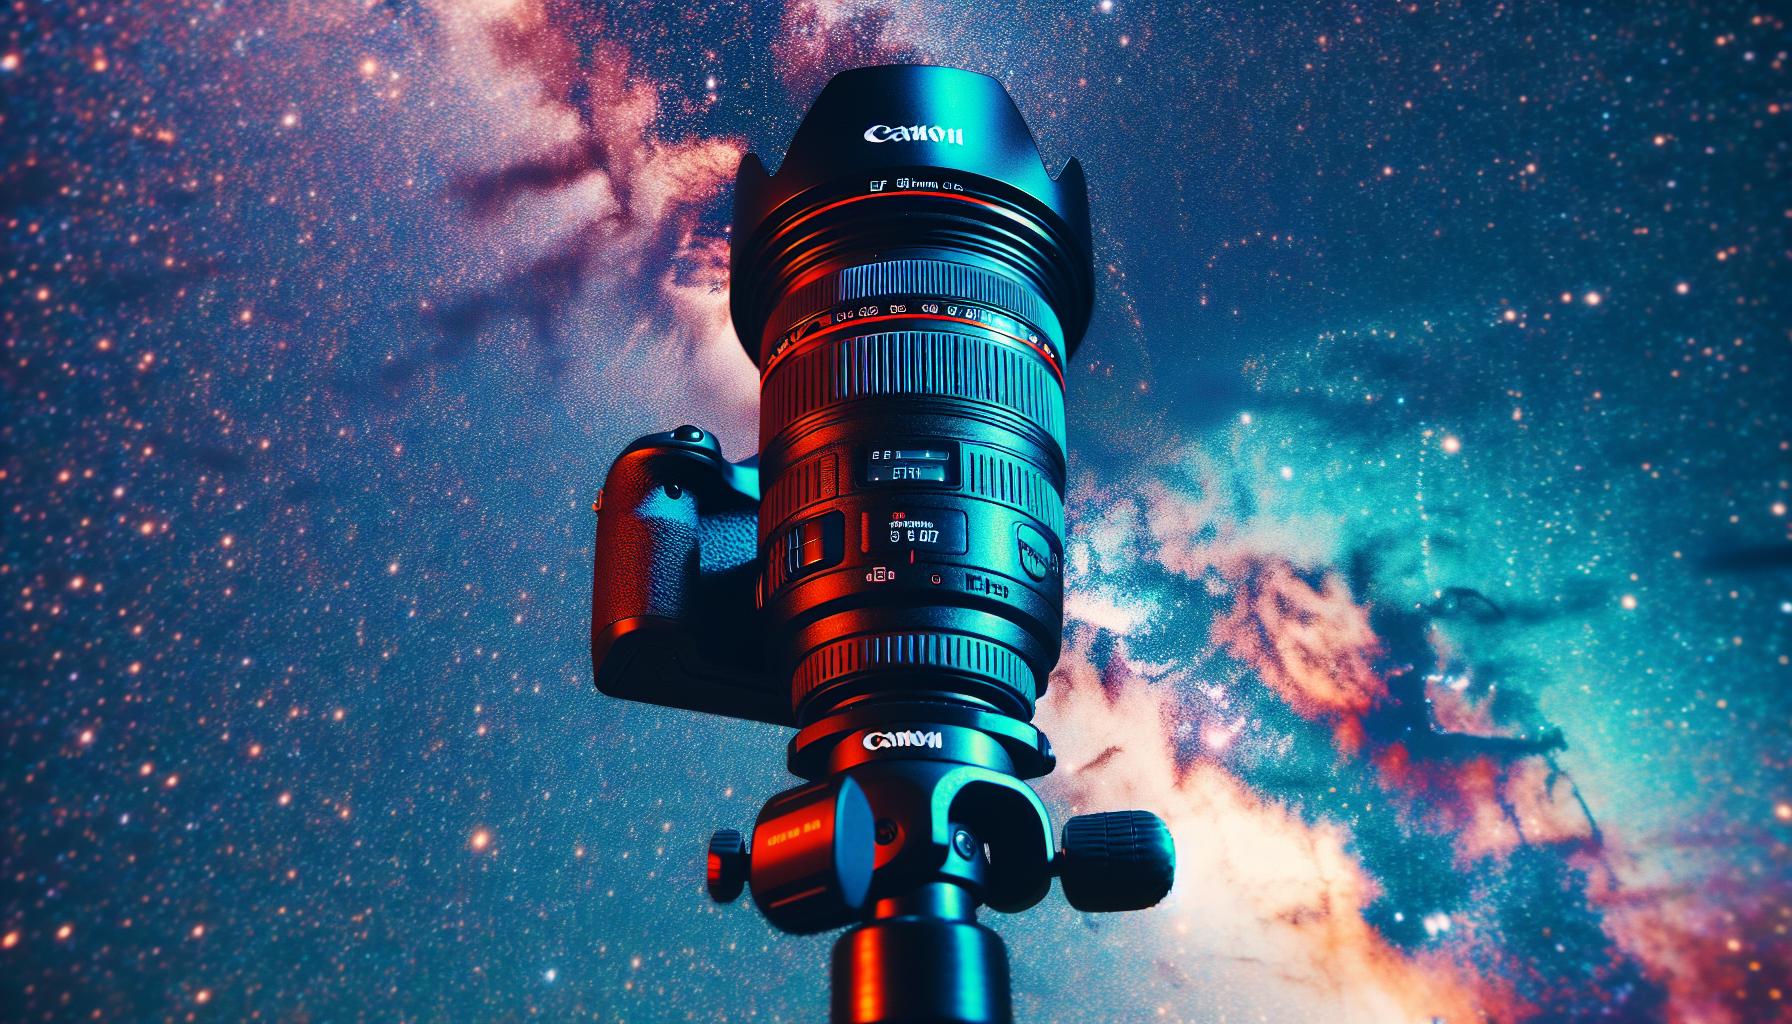 You are currently viewing Discovering the Best Canon Lens for Astrophotography: The Canon EF 85mm f/1.8 USM Review